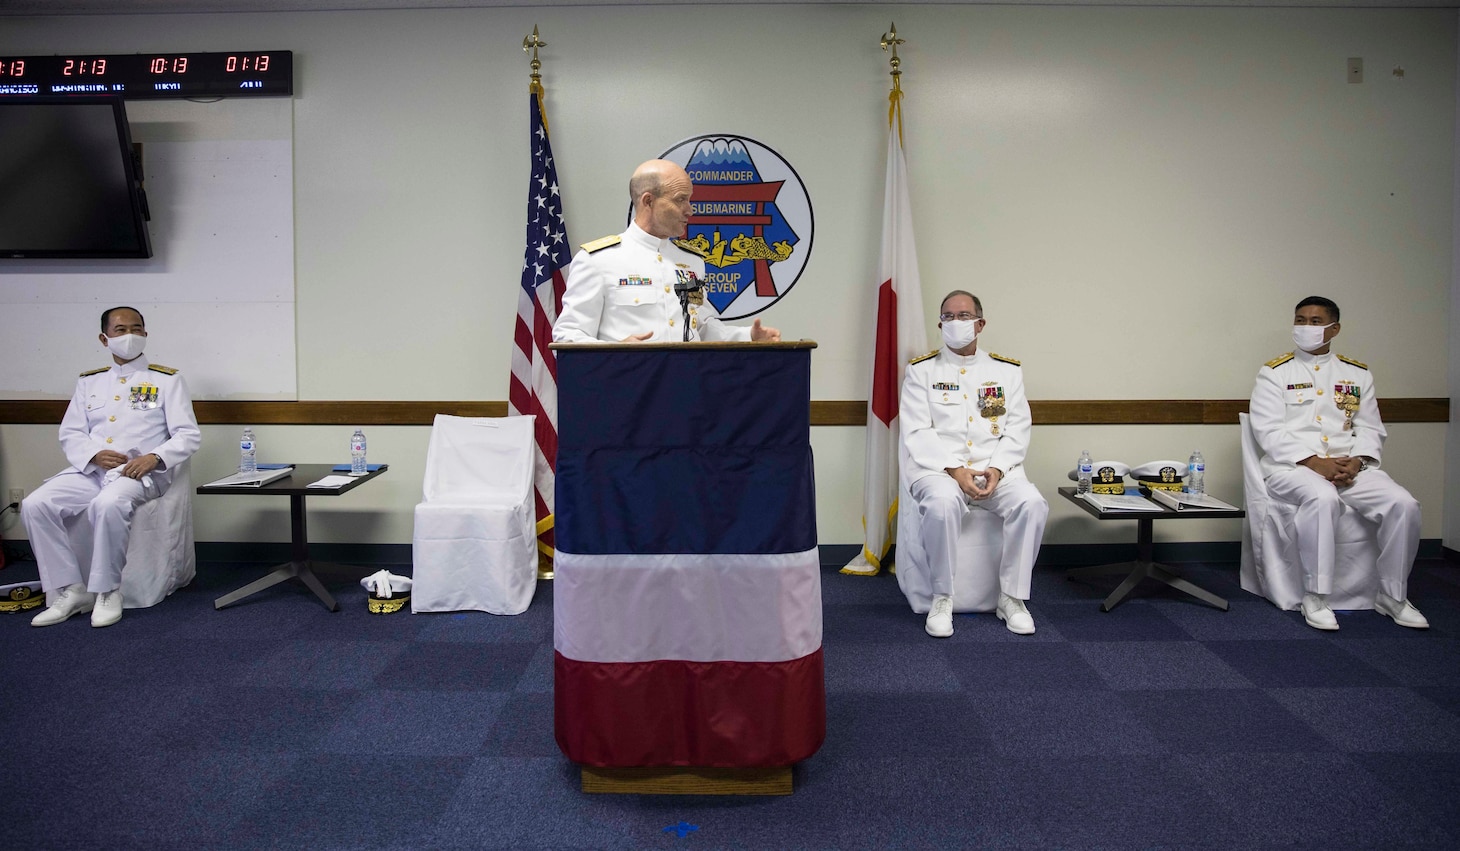 YOKOSUKA, Japan (Aug. 28, 2020) Vice Adm. Bill Merz, Commander, U.S. 7th Fleet, gives remarks during Commander, Submarine Group 7’s (CSG7) change of command ceremony. Rear Adm. Leonard “Butch” Dollaga, a native of Vallejo, California, relieved Rear Adm. James “Jimmy” Pitts, a native of Milton, Florida, of command at Fluckey Hall. CSG7 directs submarine activities throughout the Western Pacific, Indian Ocean and Arabian Sea; two forward-deployed submarine tenders and four attack submarines homeported in Guam; five surveillance towed array sensor system vessels and three oceanographic survey vessels when tasked for theater anti-submarine warfare operations.